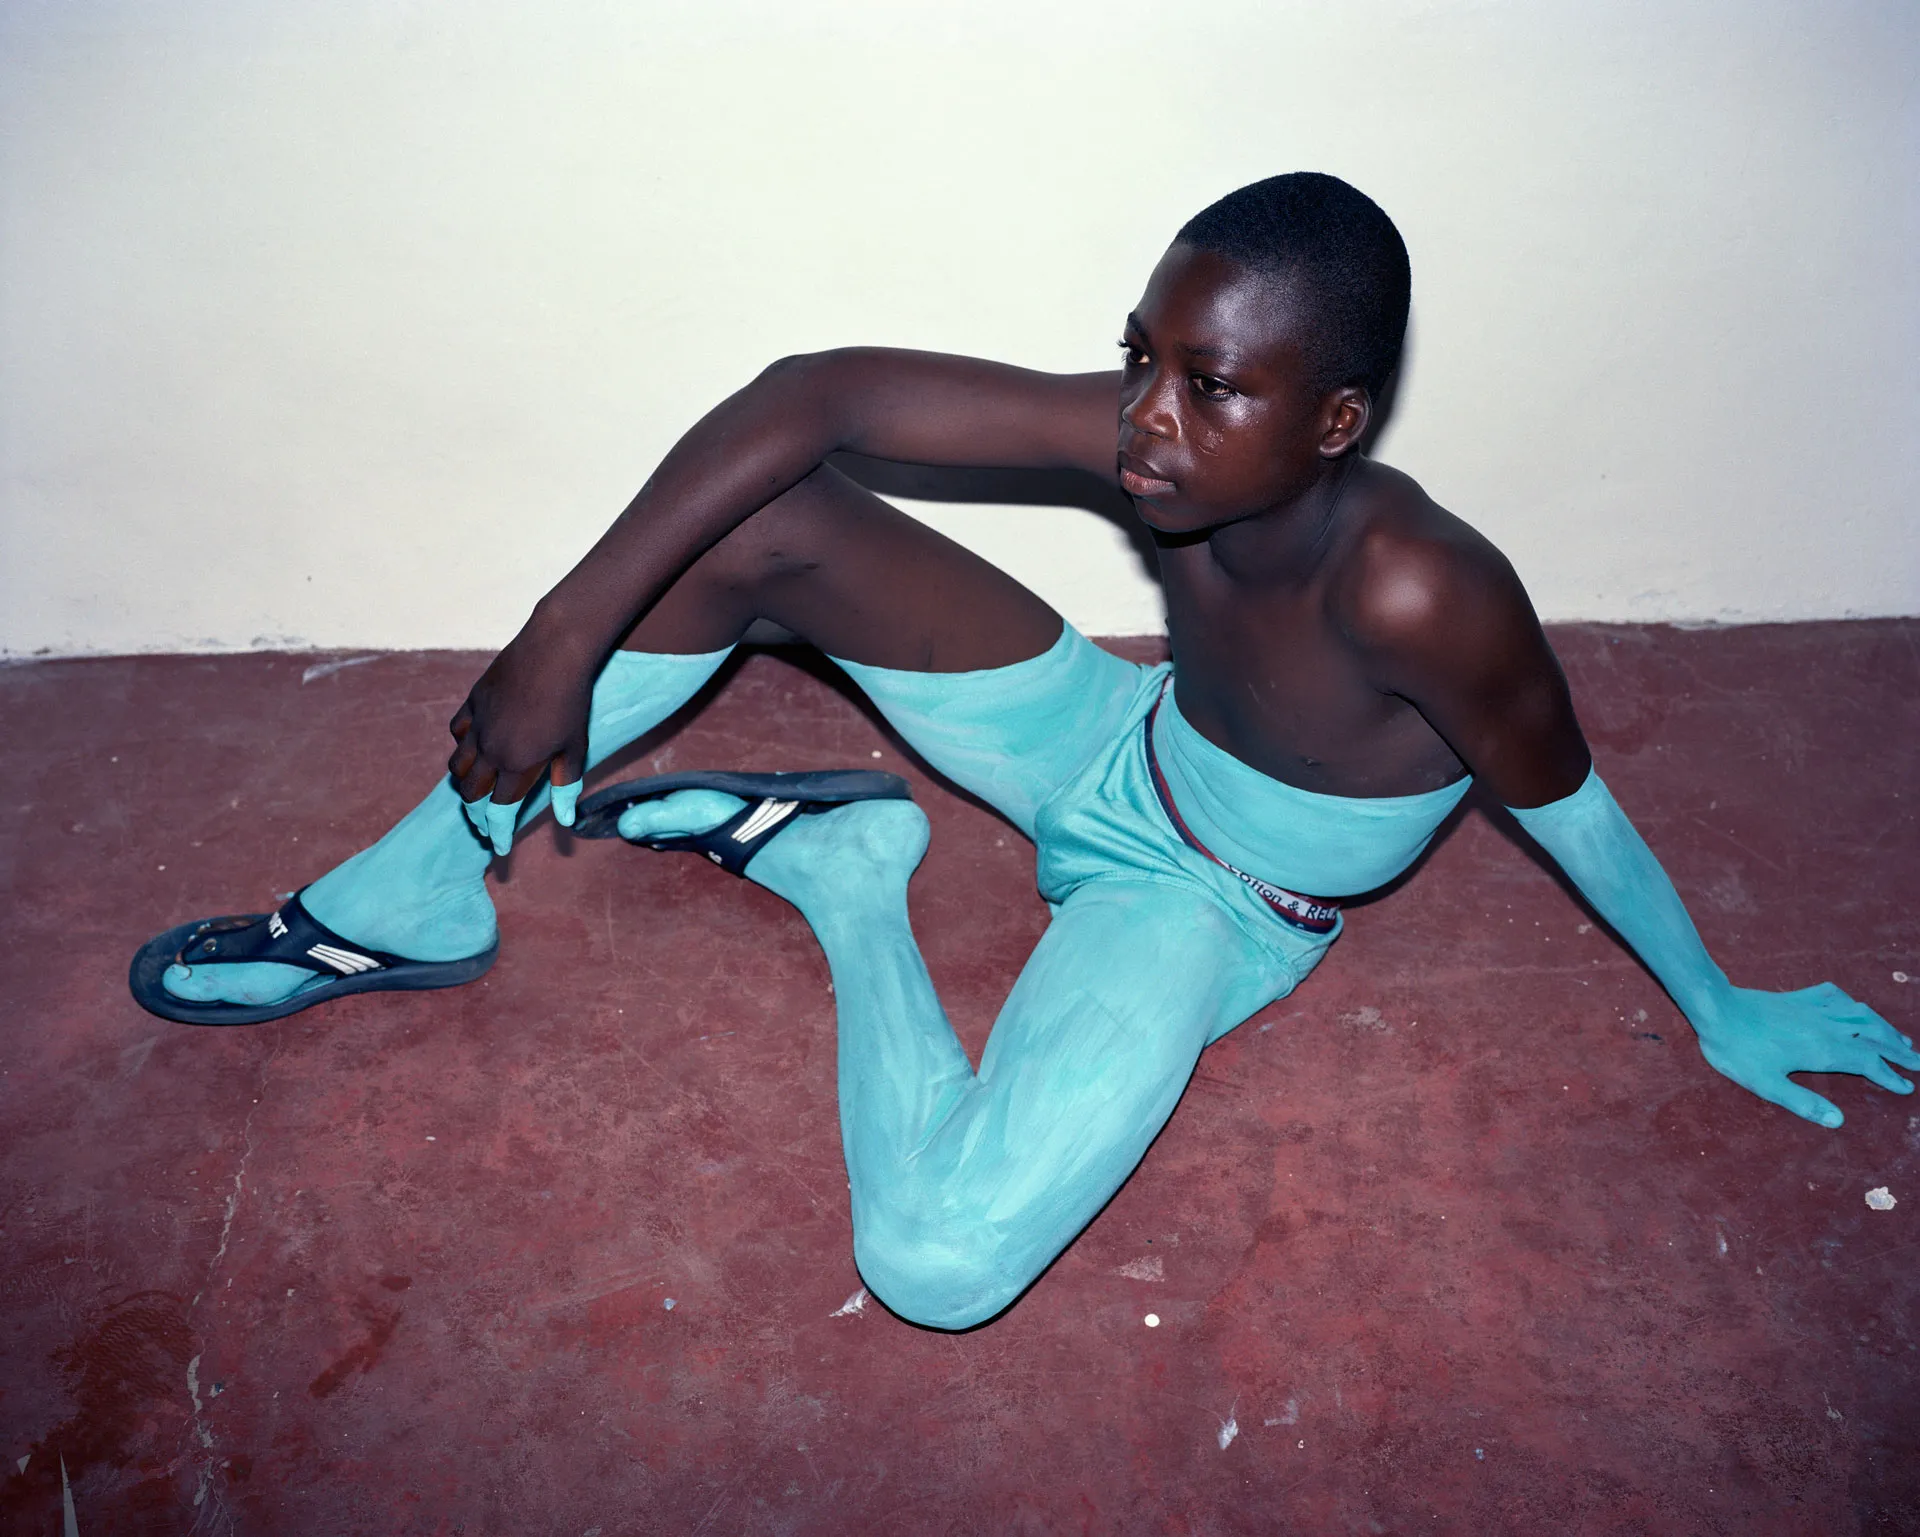 Magical Thinking: An interview with Viviane Sassen on the occasion of her  show Pikin Slee